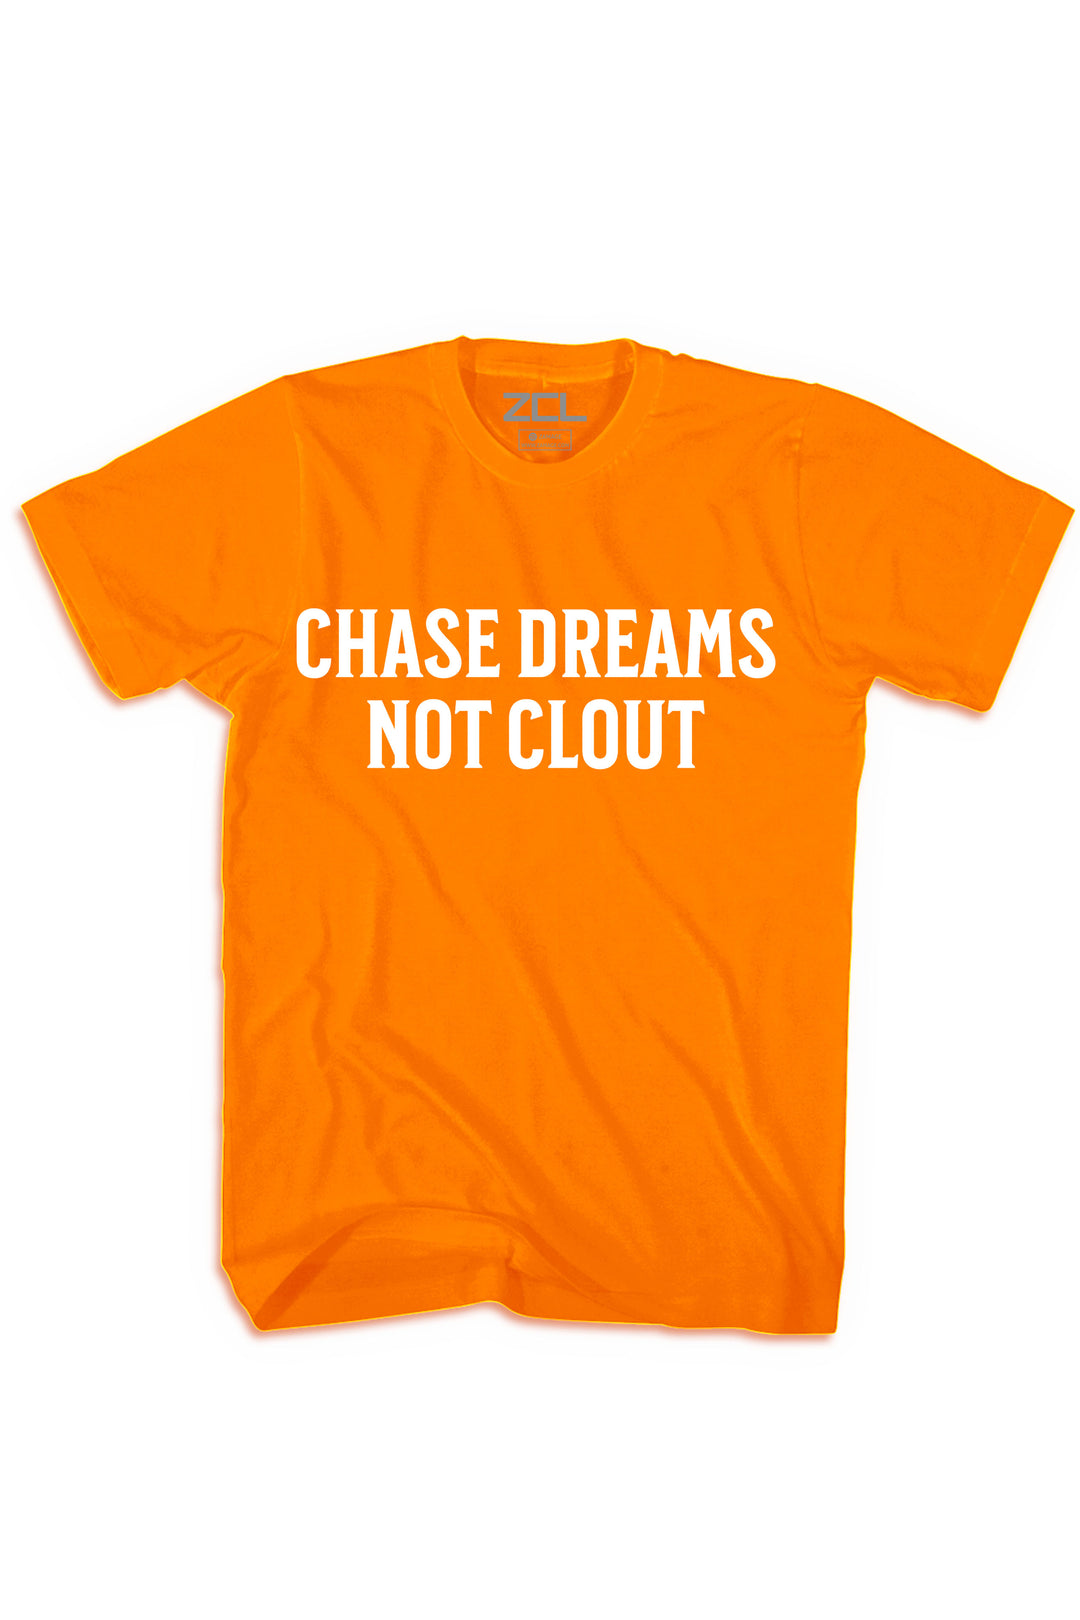 Chase Dreams Not Clout Tee (White Logo) - Zamage